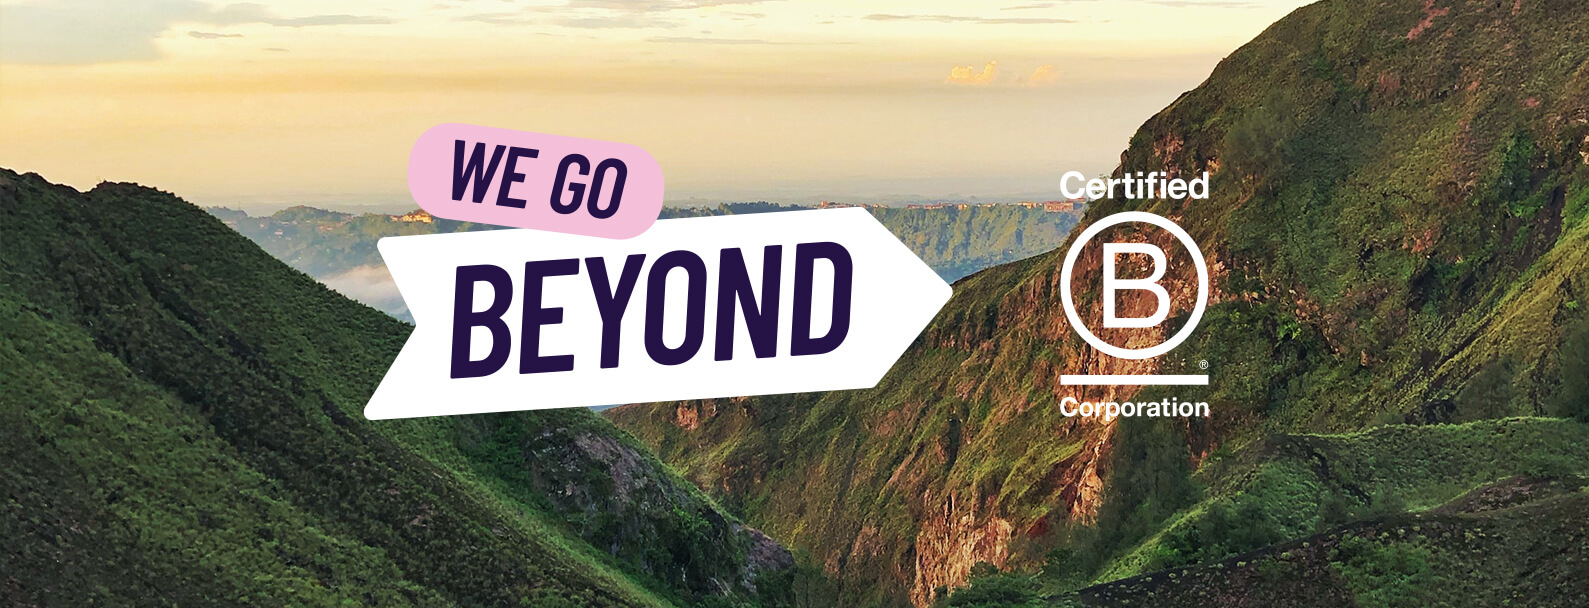 B-corp-logo-with-we-go-beyond-slogan-over-mountainous-background